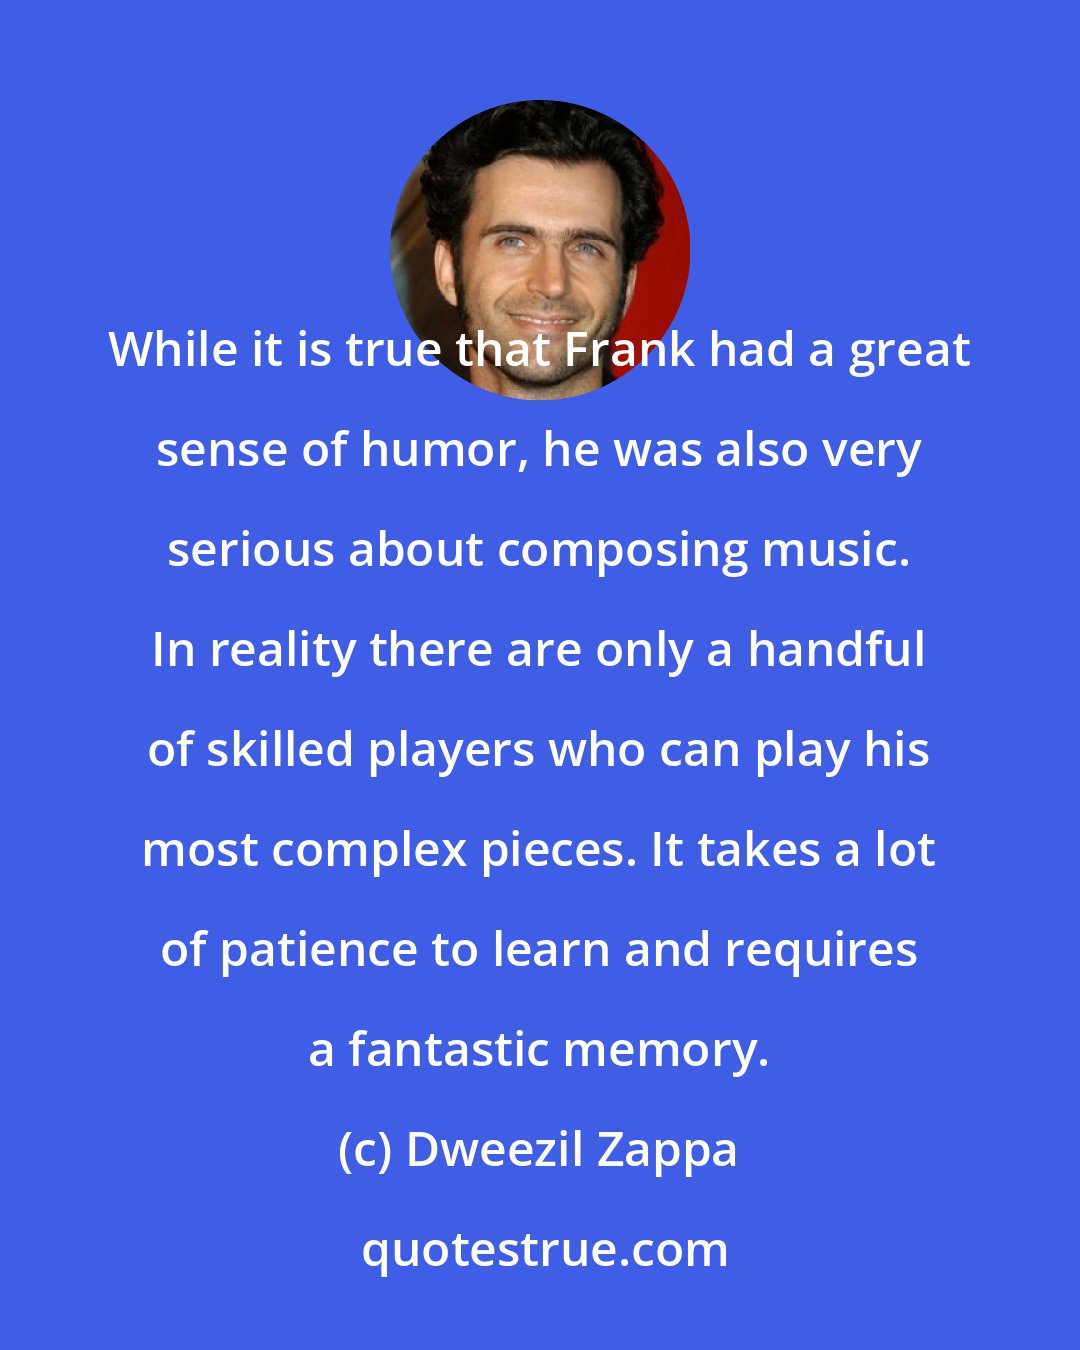 Dweezil Zappa: While it is true that Frank had a great sense of humor, he was also very serious about composing music. In reality there are only a handful of skilled players who can play his most complex pieces. It takes a lot of patience to learn and requires a fantastic memory.